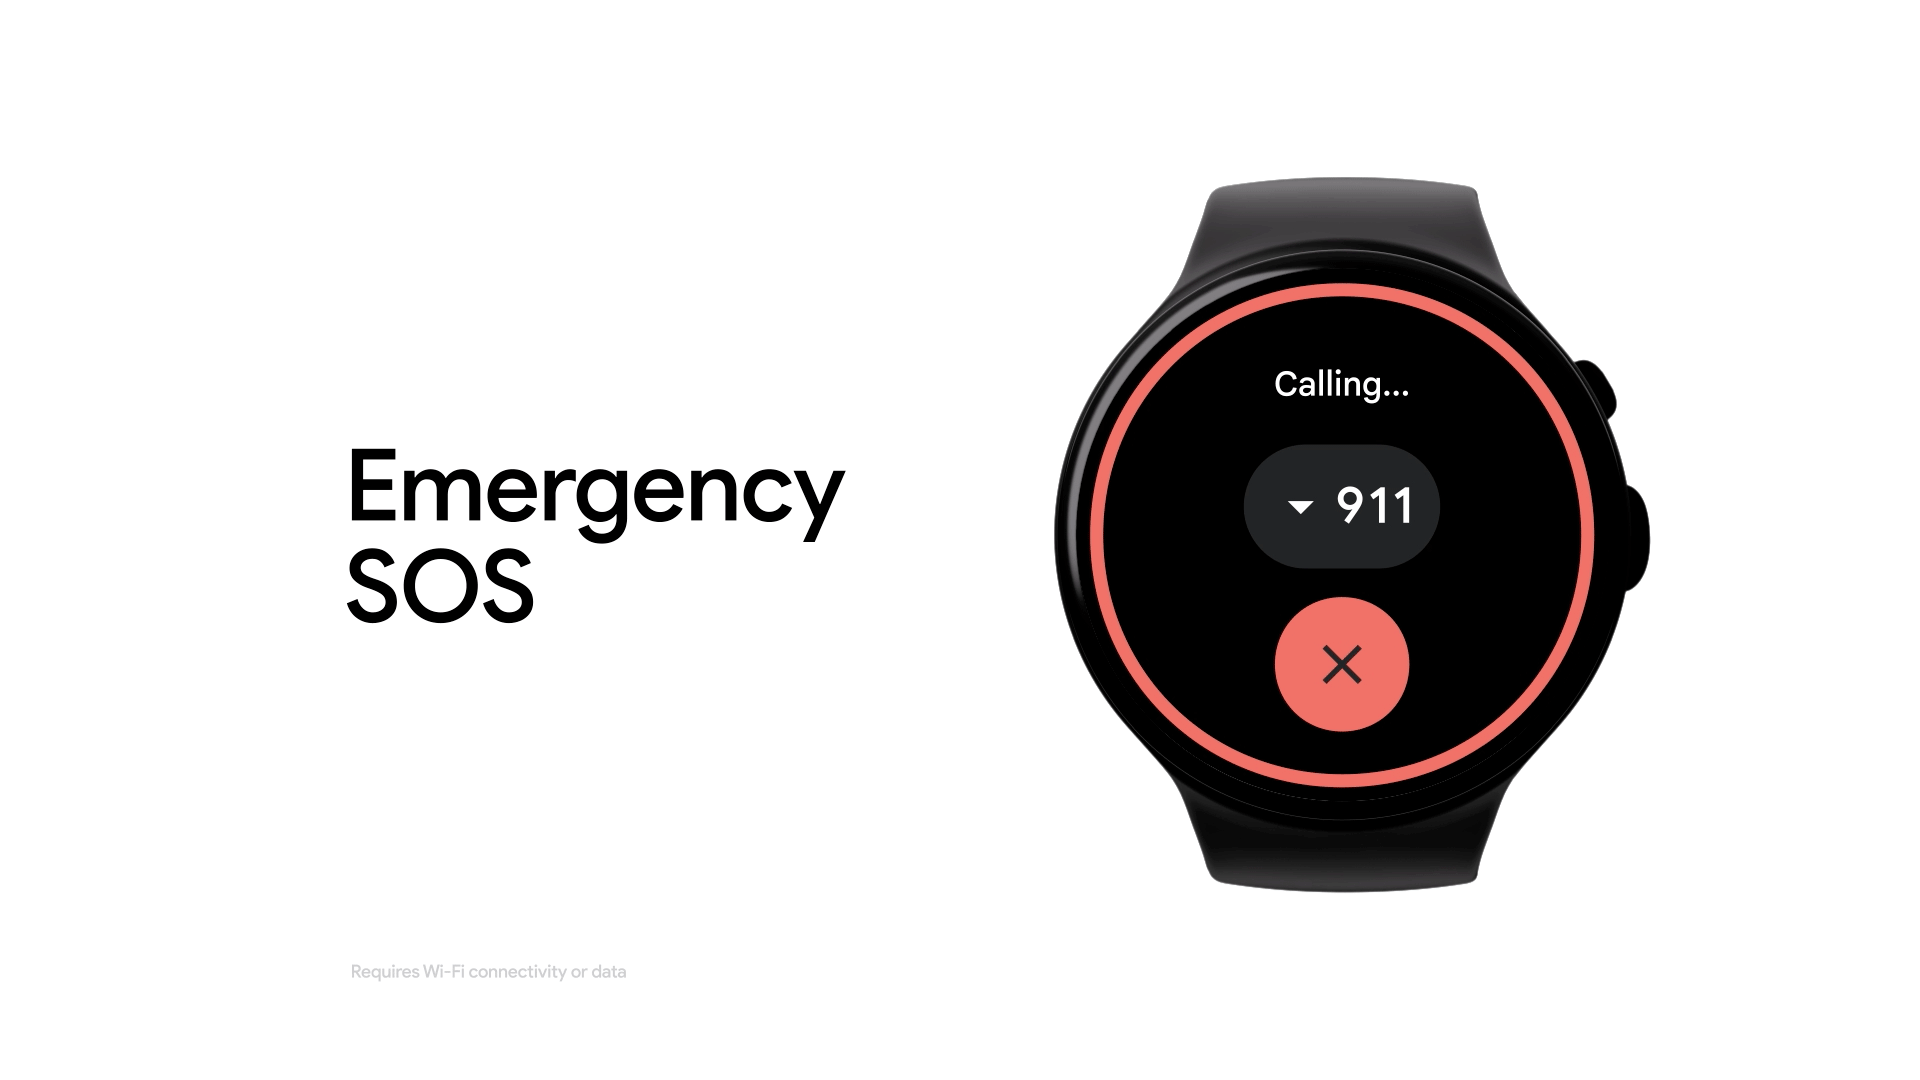 A watch screen depicts the Emergency SOS feature. The watch face has an outline of a red circle that counts down the time before an emergency call is made directly from the watch. In this example 911 is called.